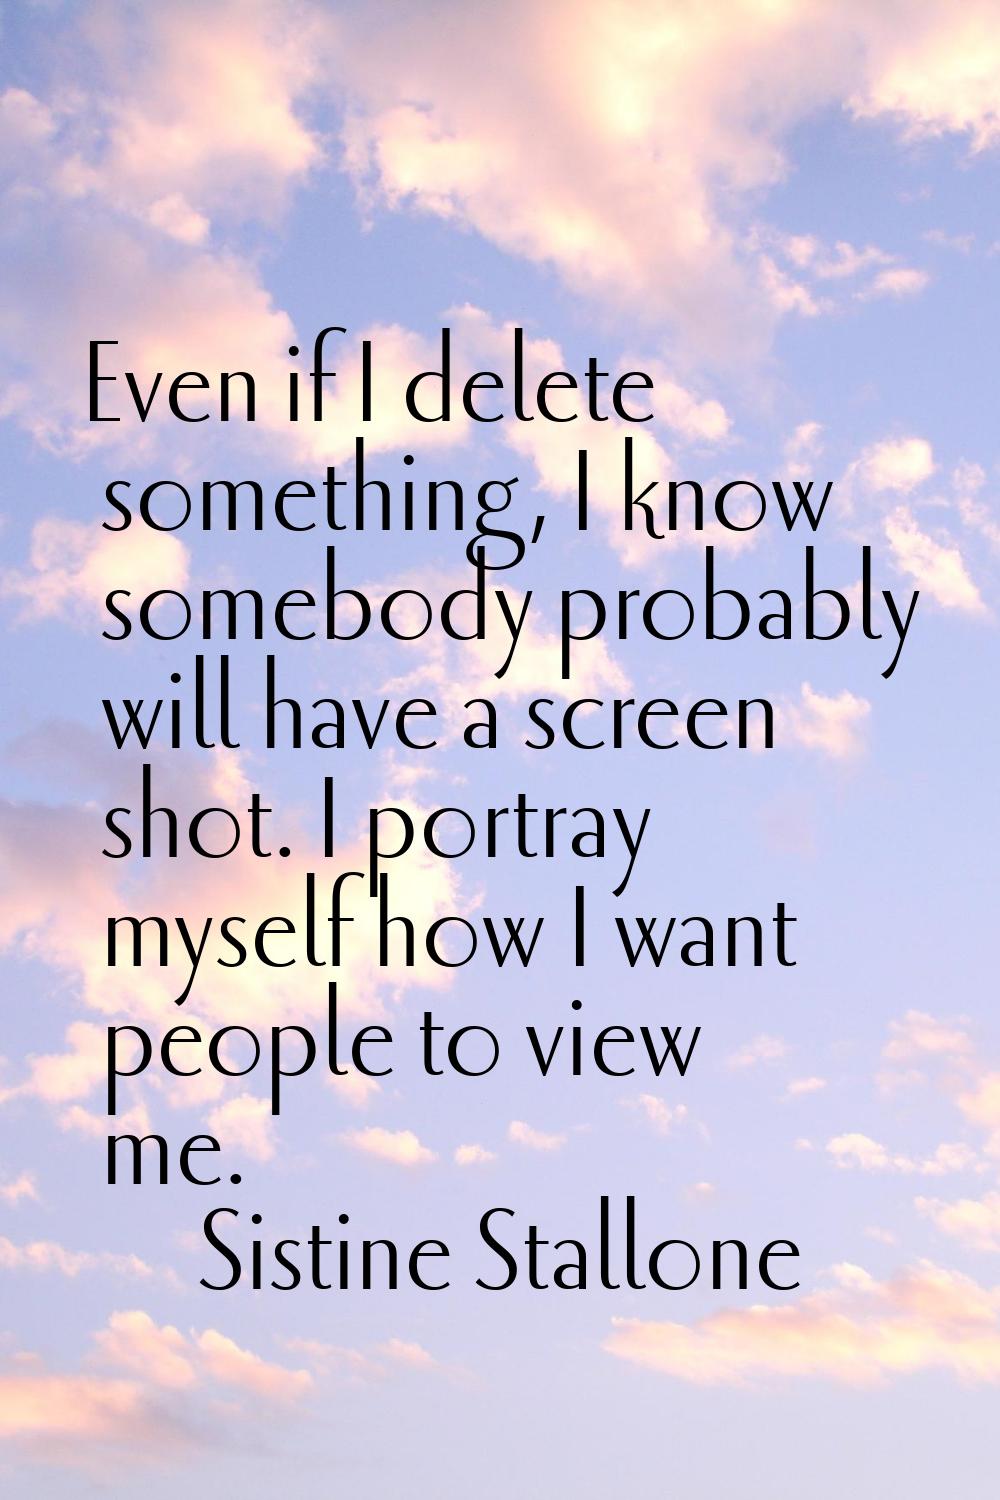 Even if I delete something, I know somebody probably will have a screen shot. I portray myself how 